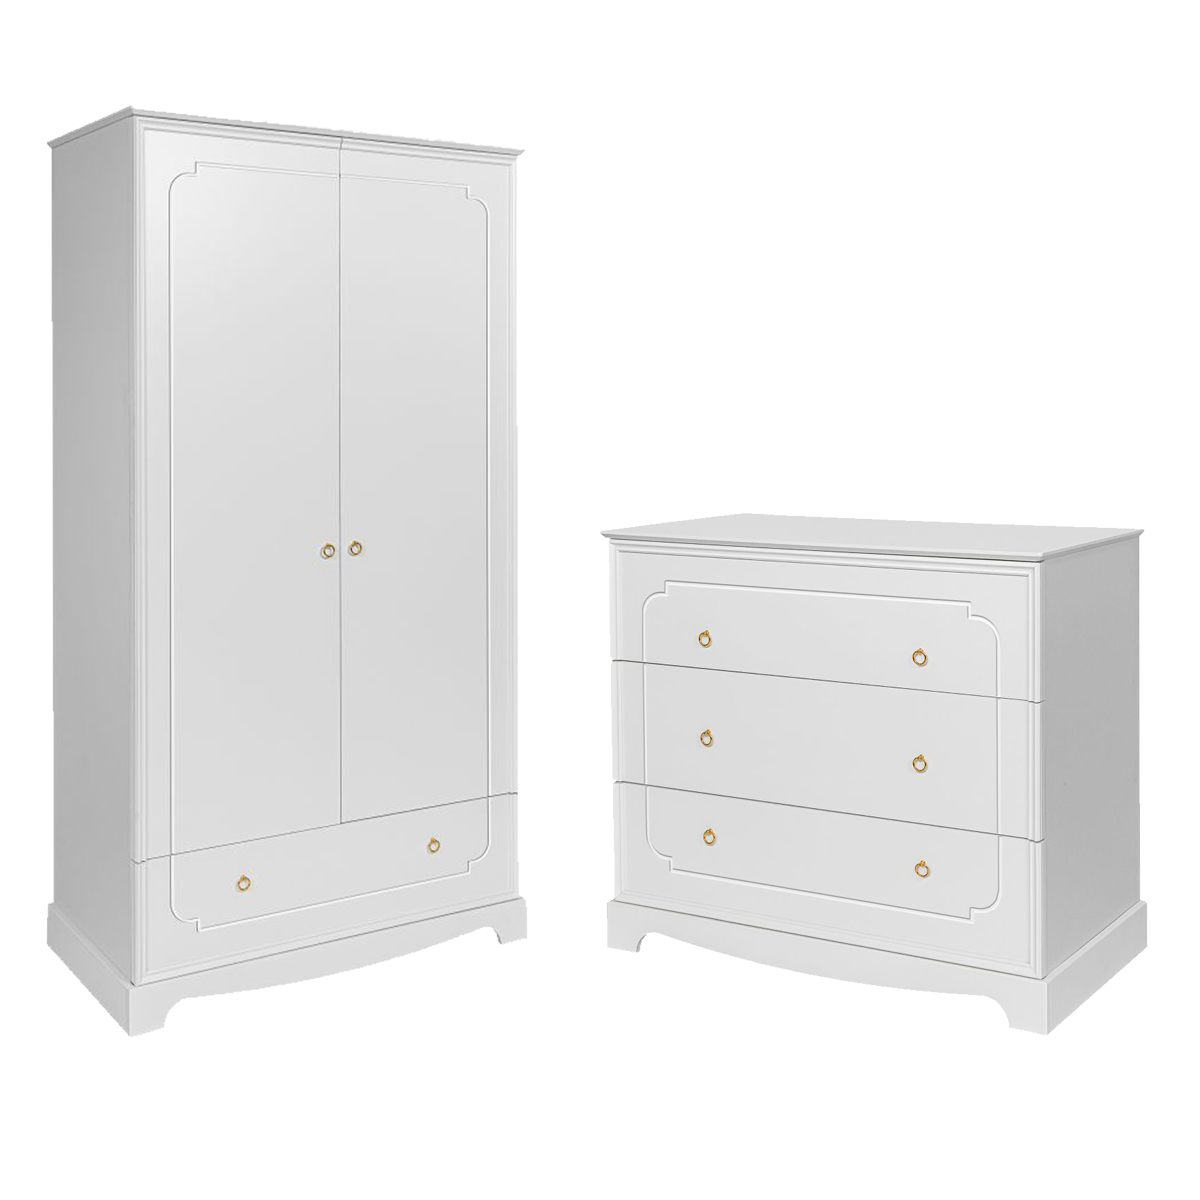 bellamy_royal_blanc_pack_armoire_commode